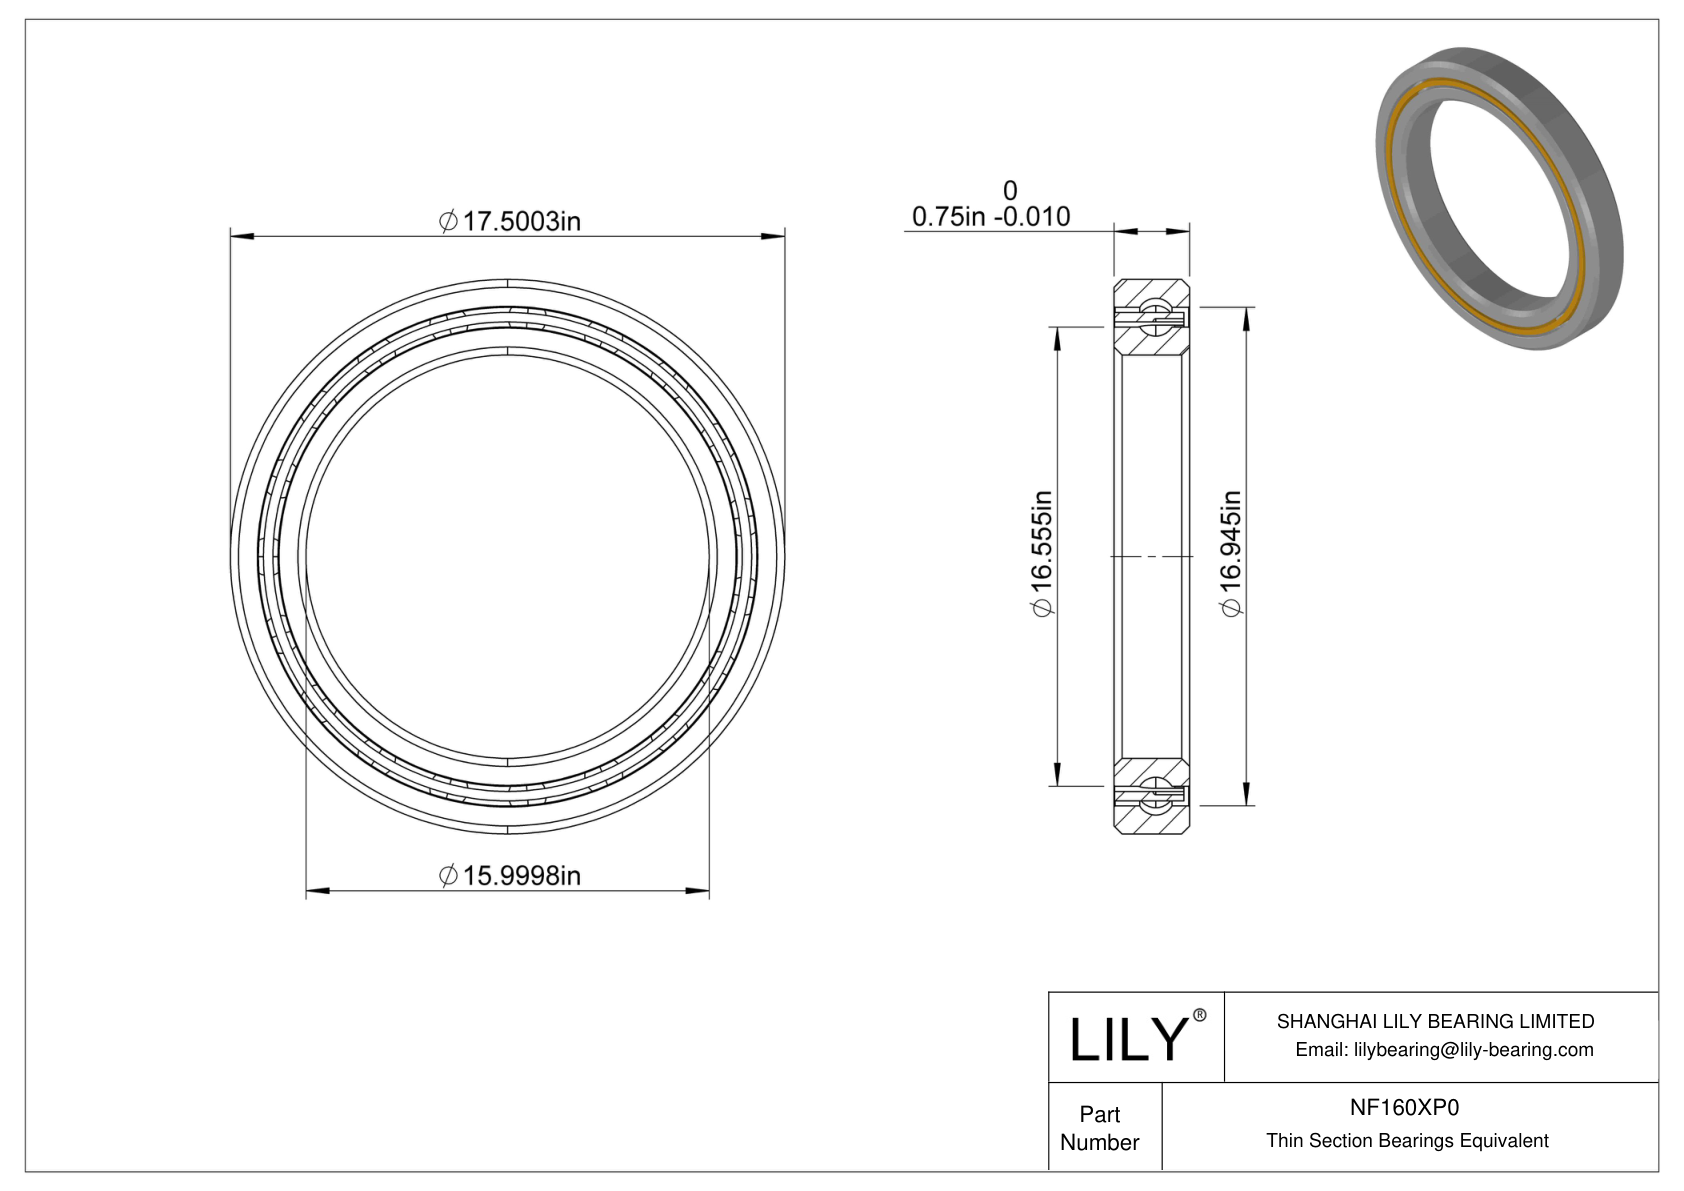 NF160XP0 Constant Section (CS) Bearings cad drawing